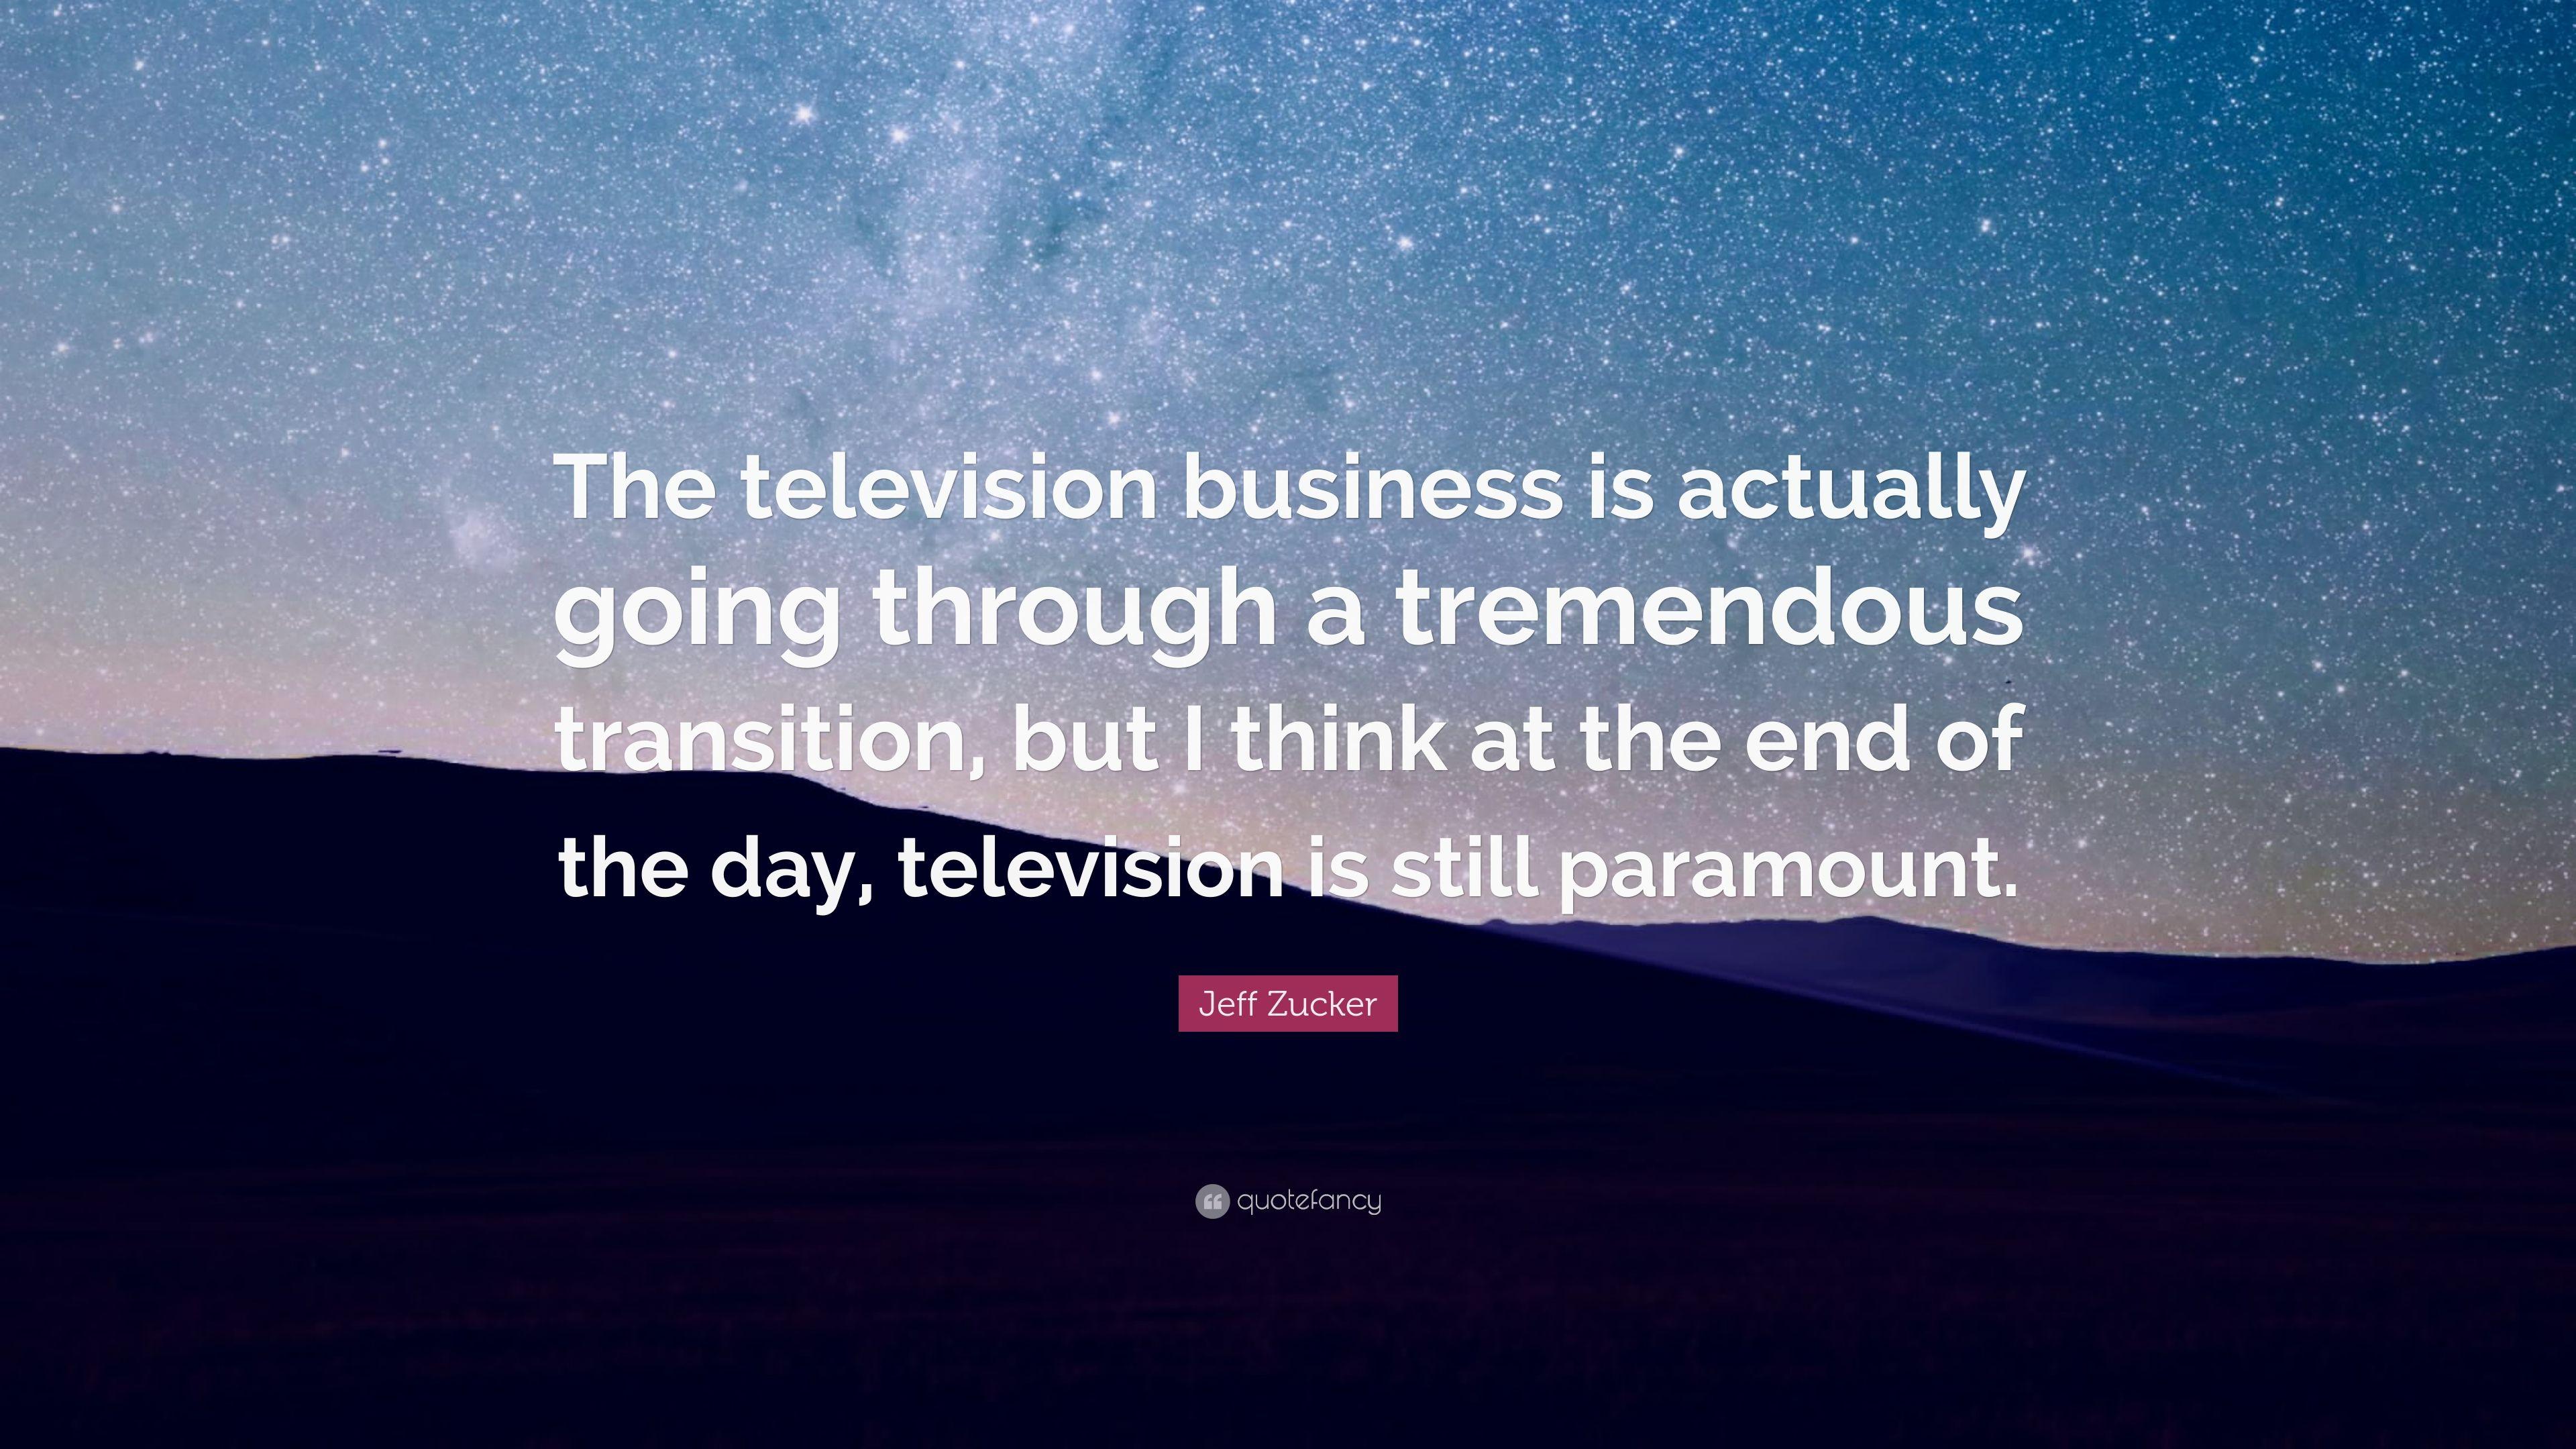 Jeff Zucker Quote: “The television business is actually going